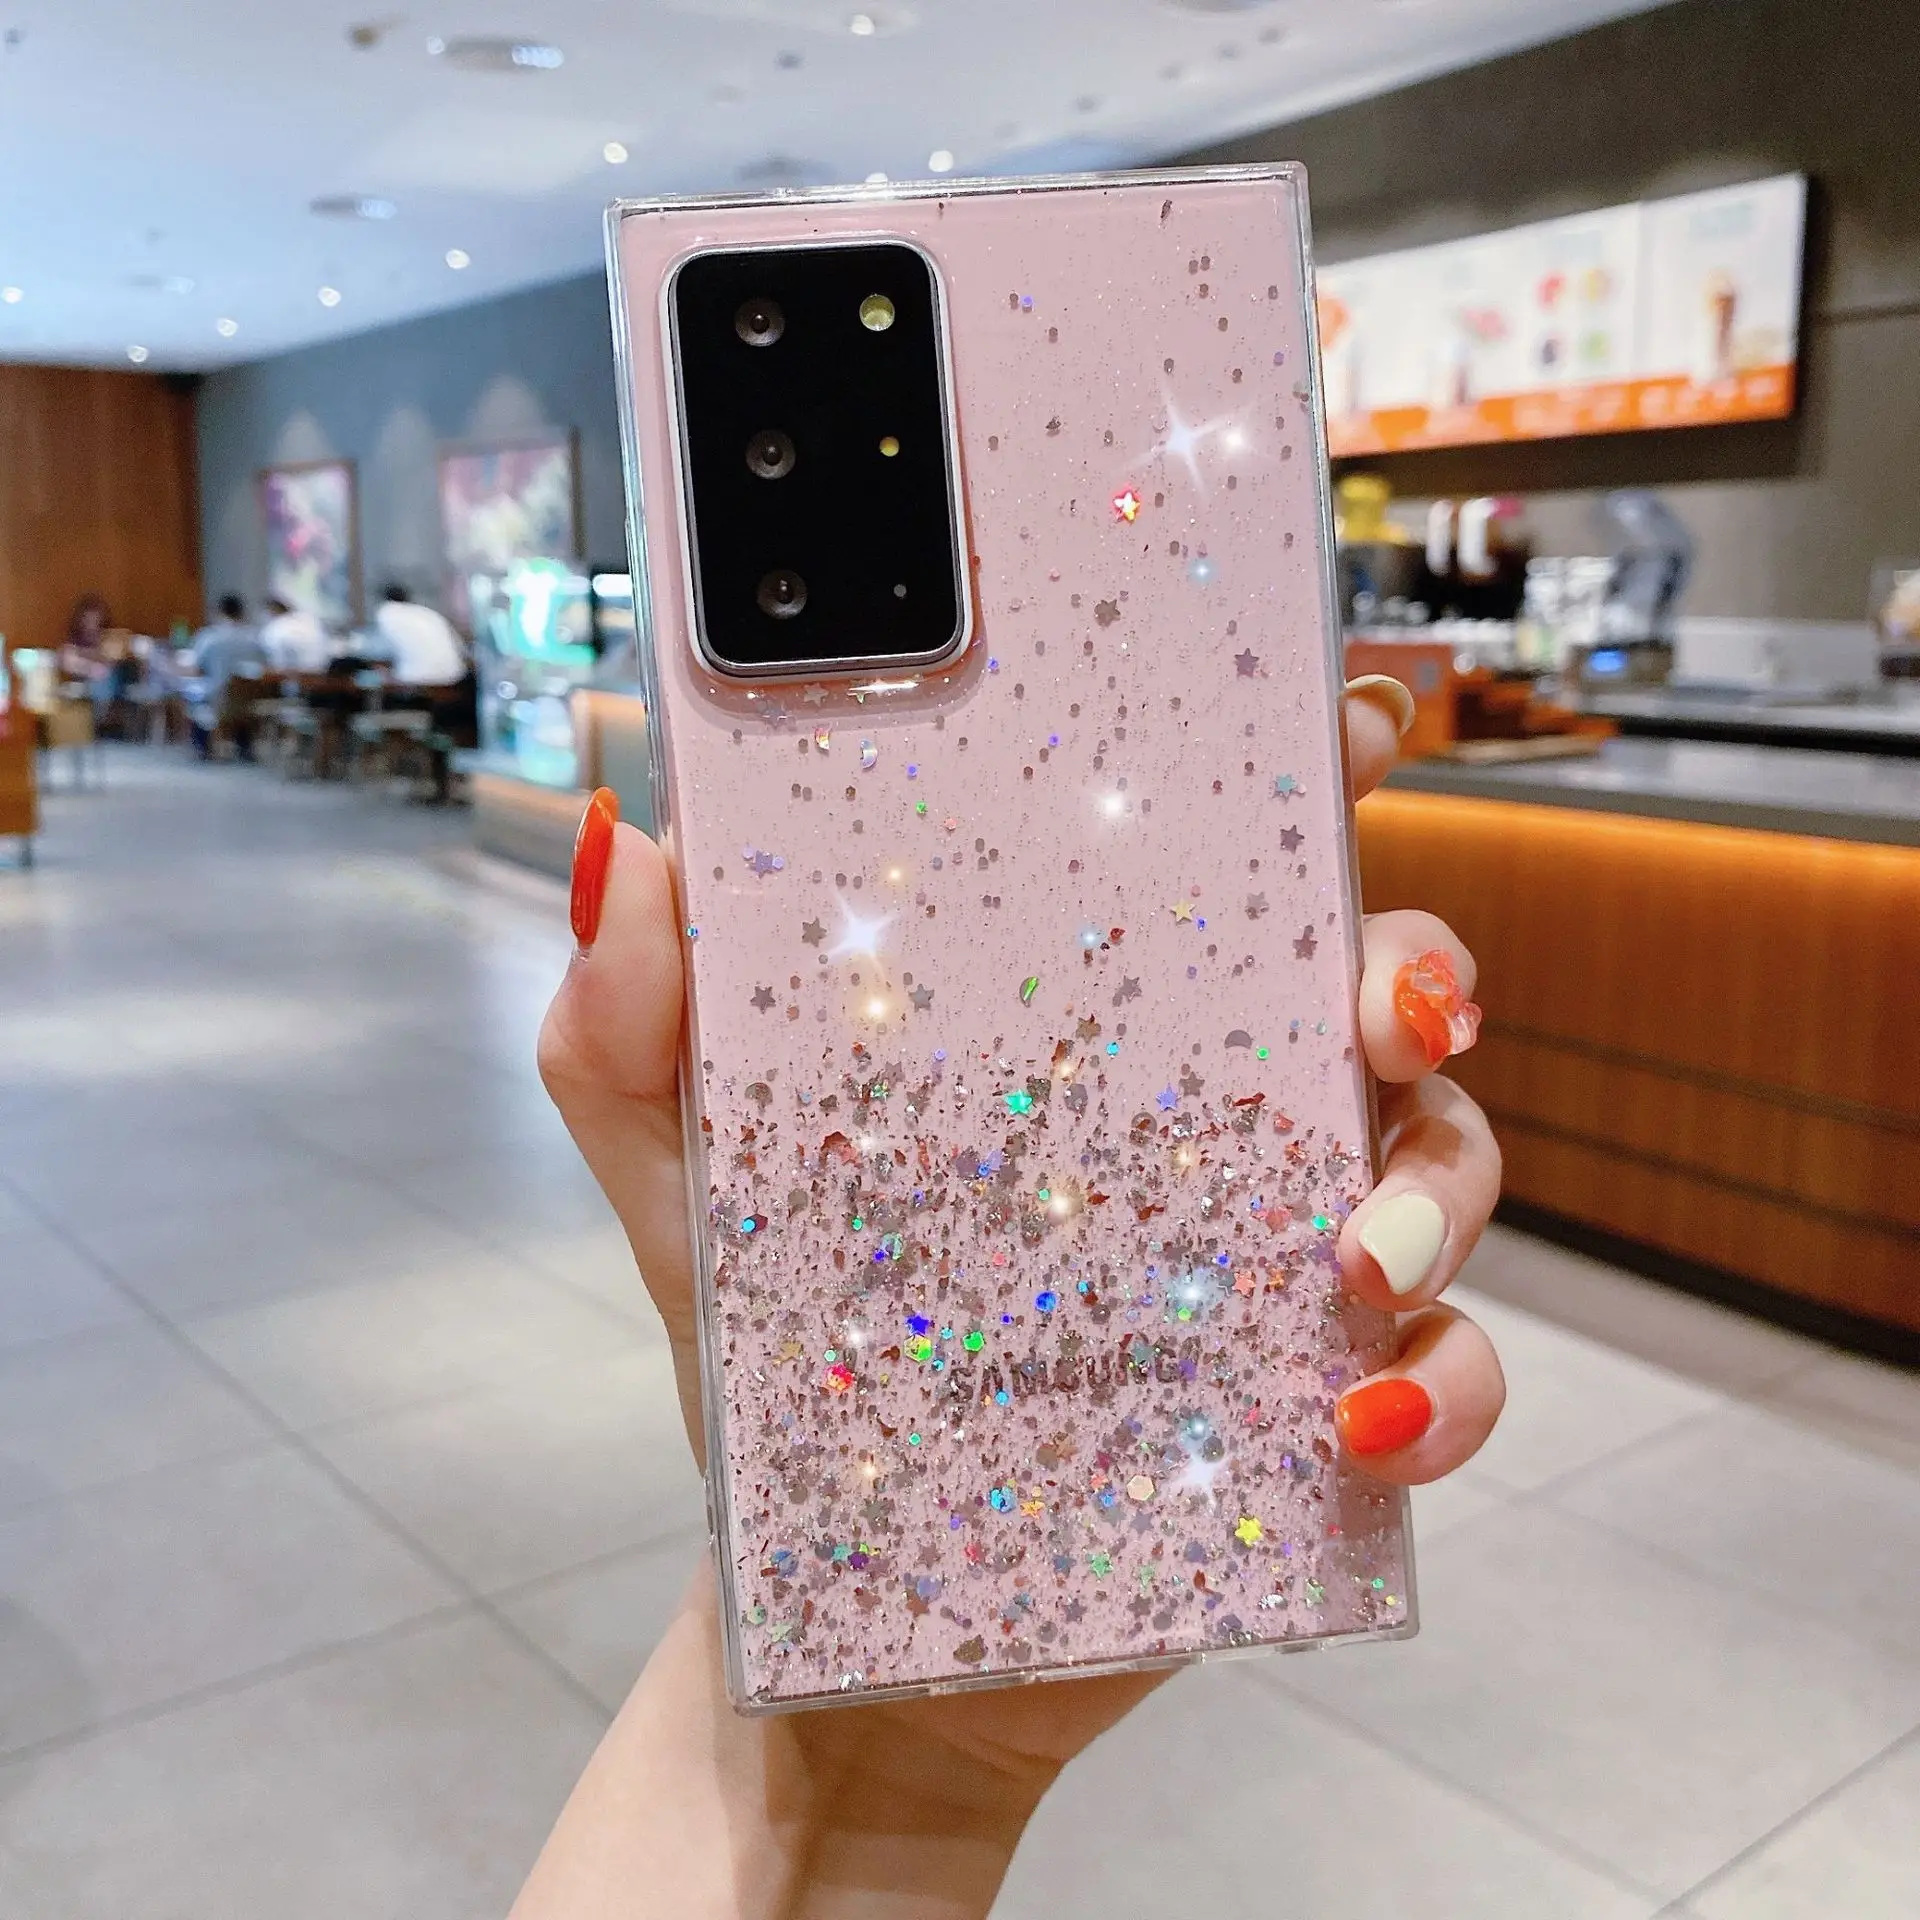 

Bling Glitter Star Soft Silicone Mobile Phone Case For Samsung Galaxy S21 FE S22 Ultra S10 S9 S8 Plus Note 20 Cover, As picture show